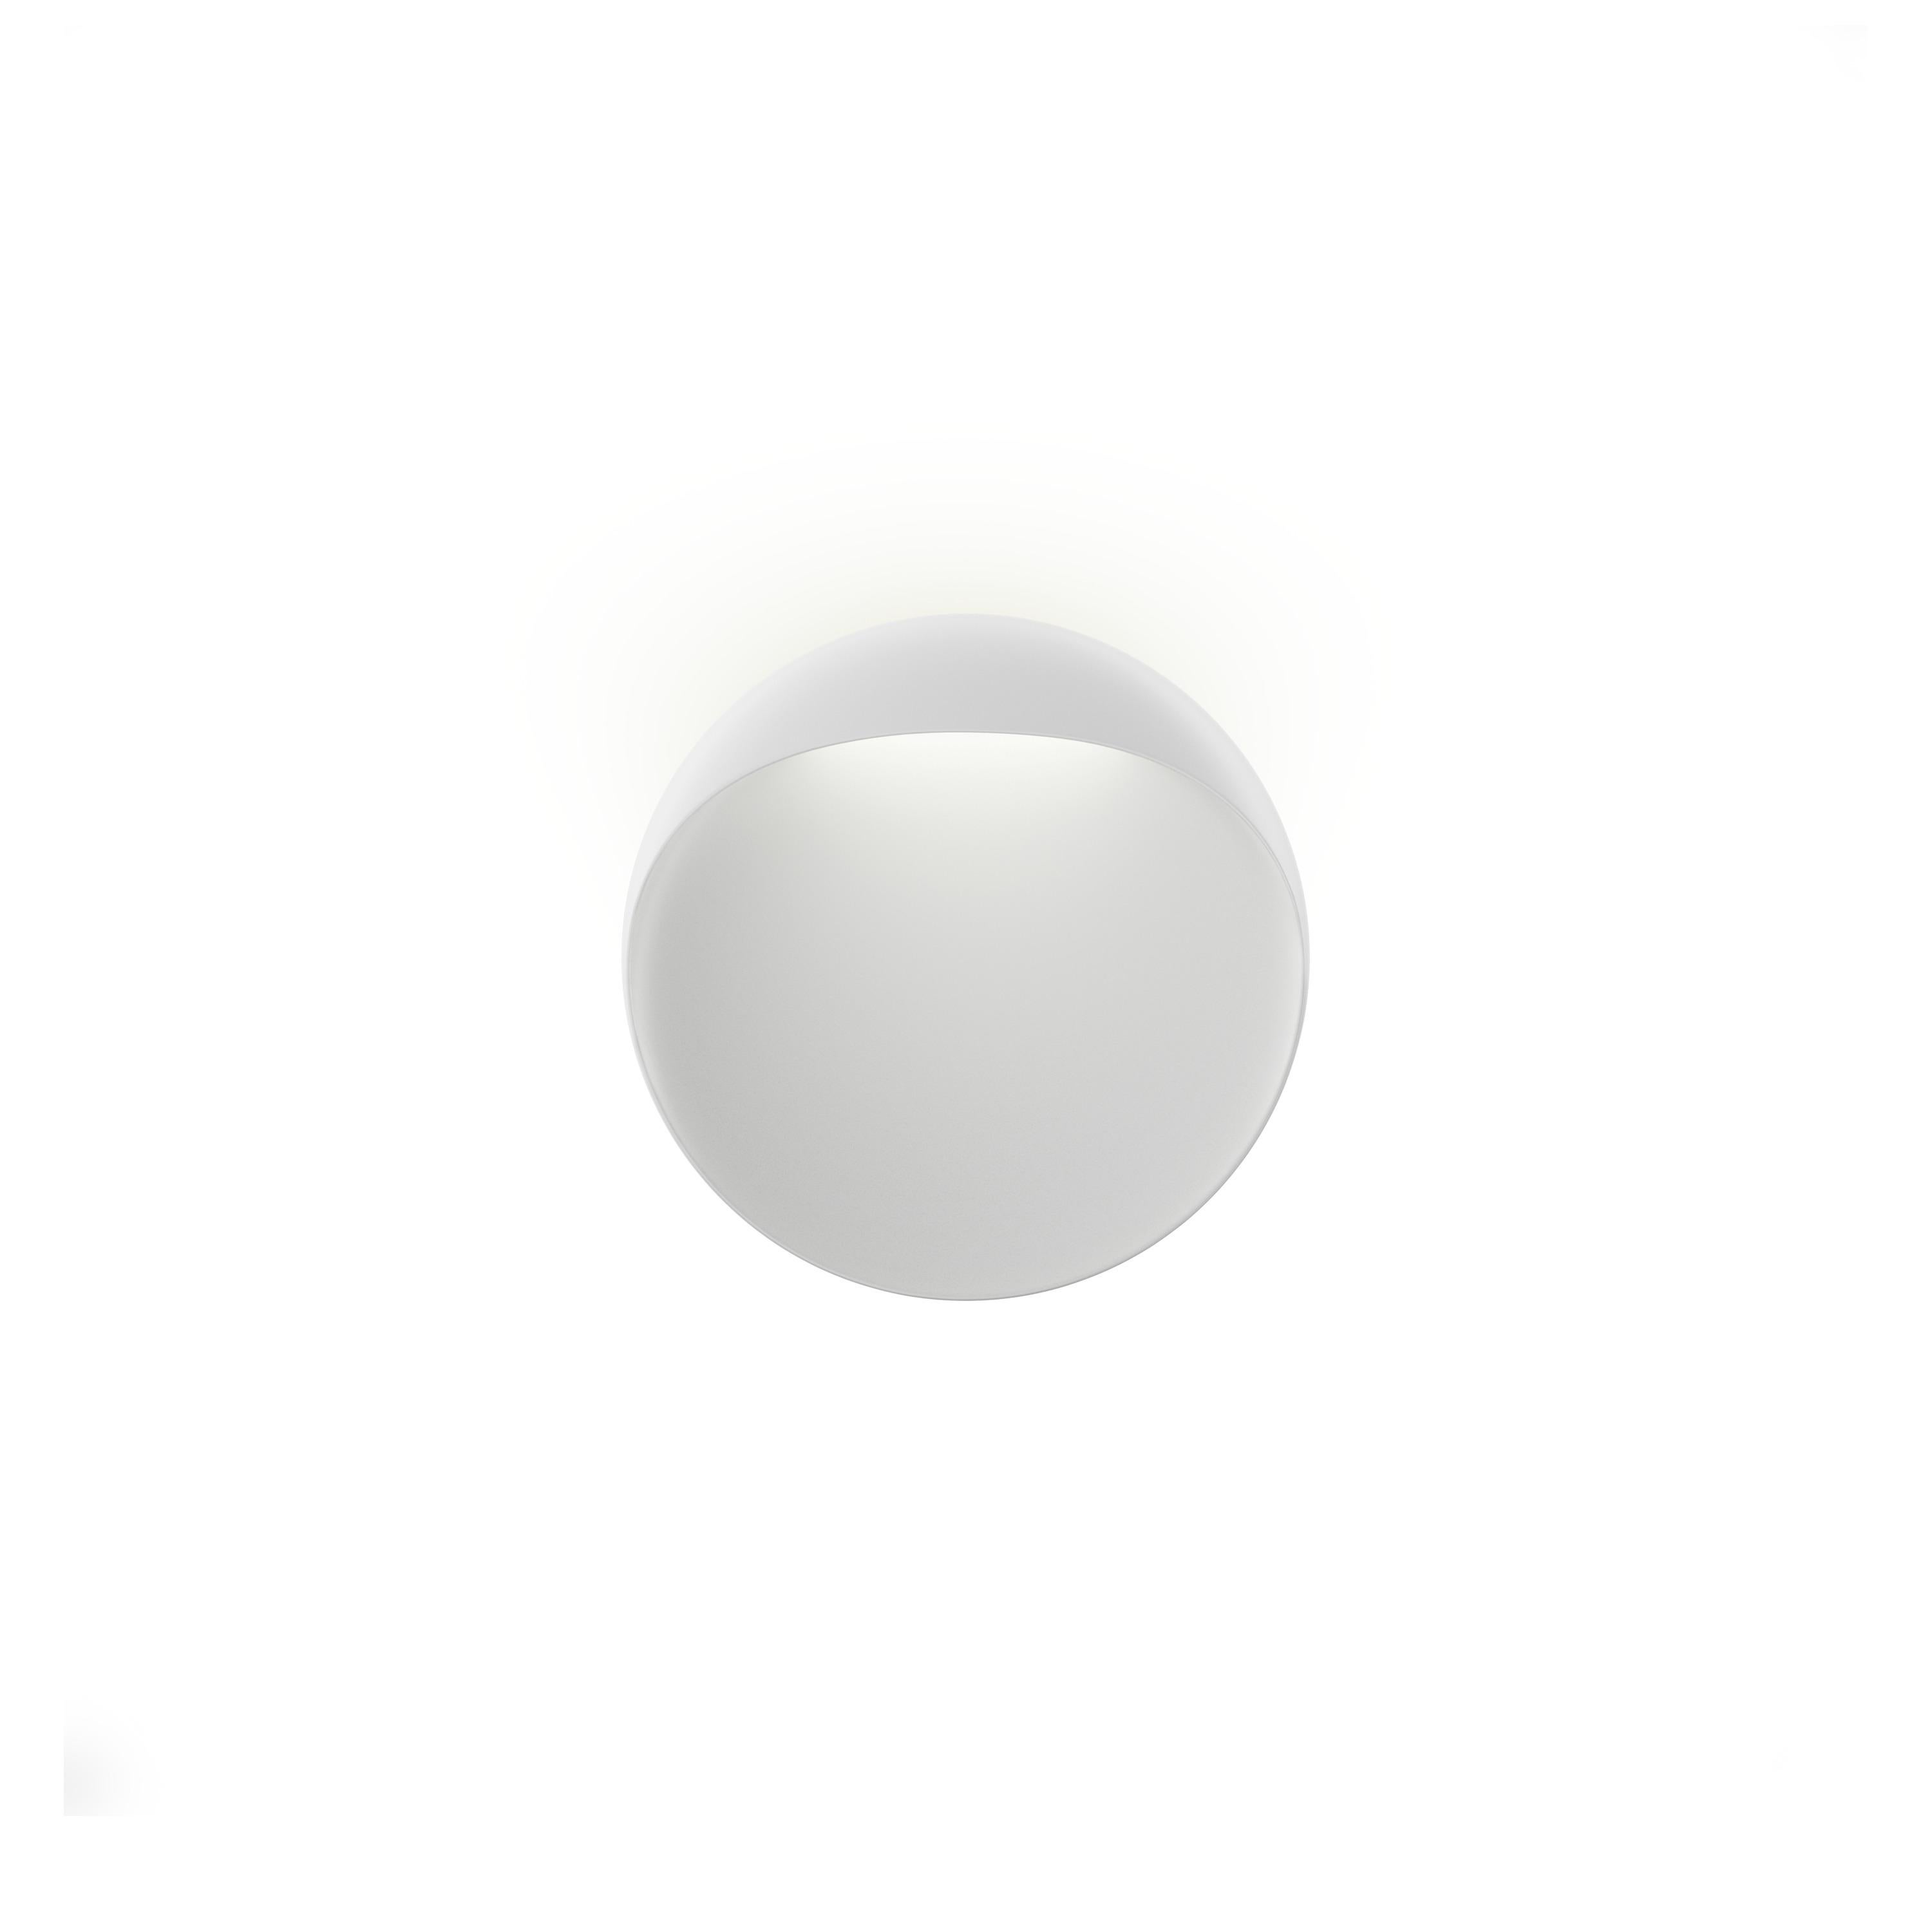 For Sale: White (white.jpg) Louis Poulsen Outdoor Small Flindt Wall Lamp by Christian Flindt